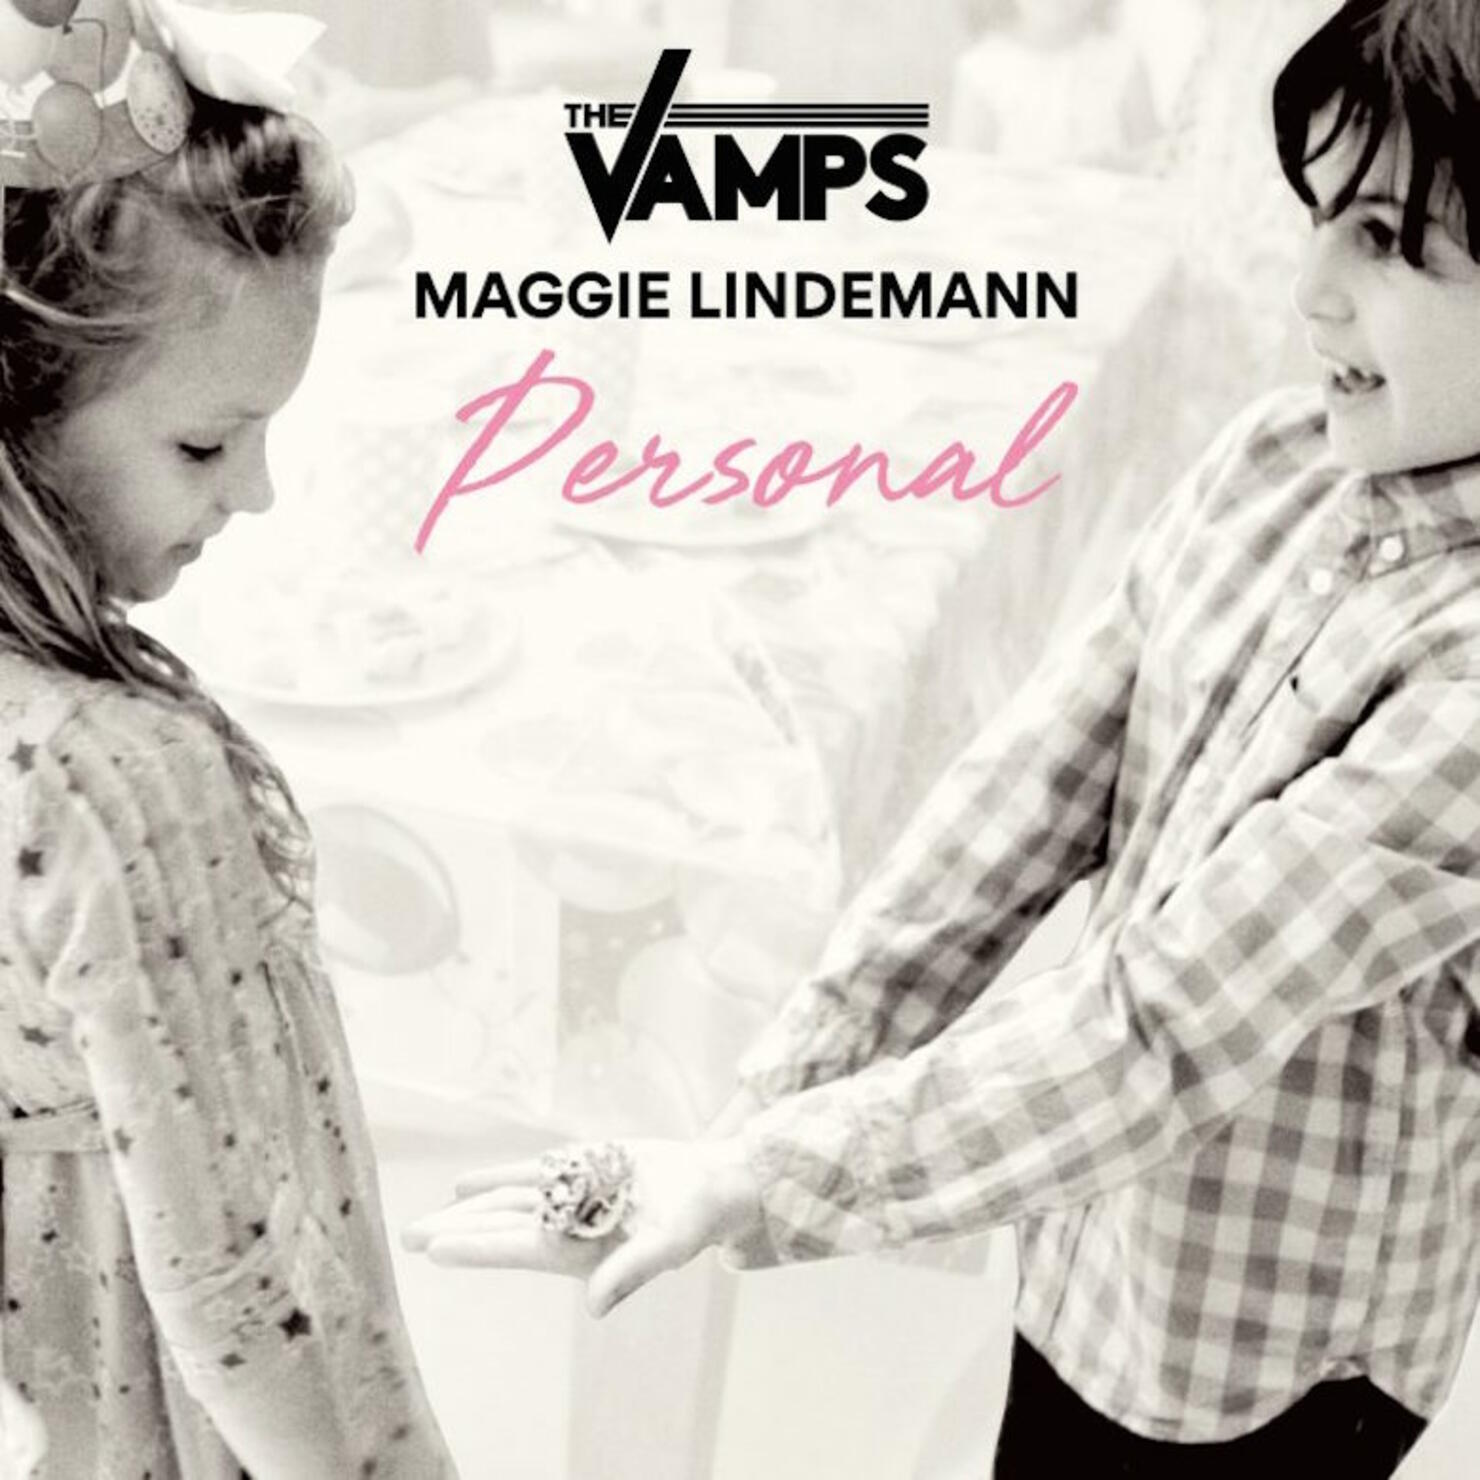 The Vamps featuring Maggie Lindemann - "Personal"